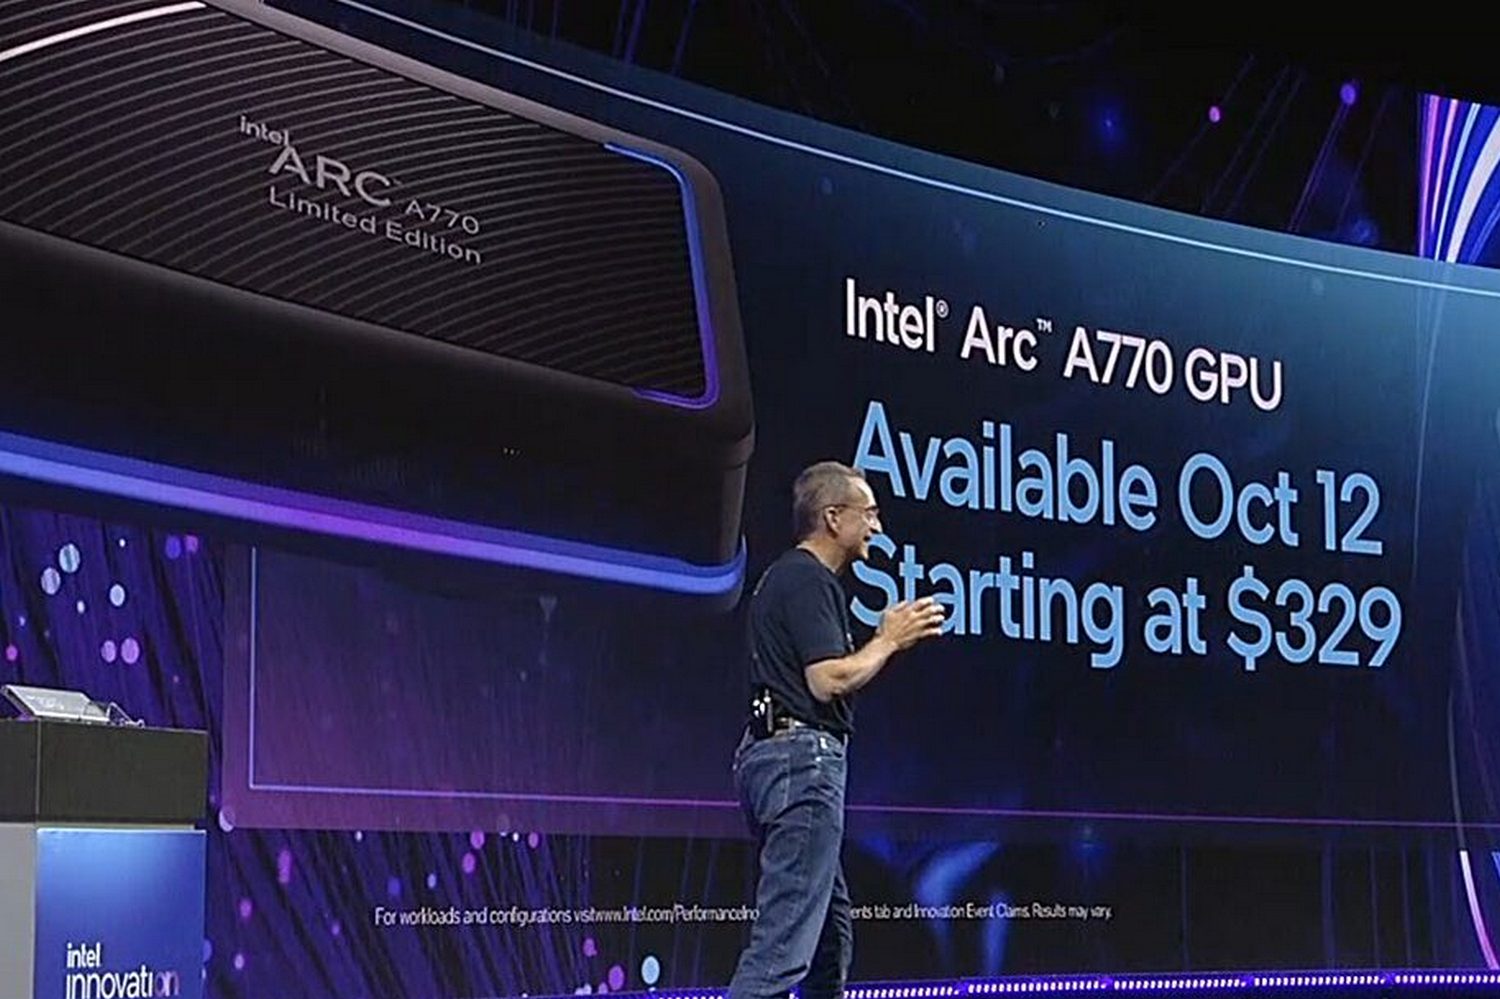 Intel decided on the date of Intel ARC A770 video cards sales start